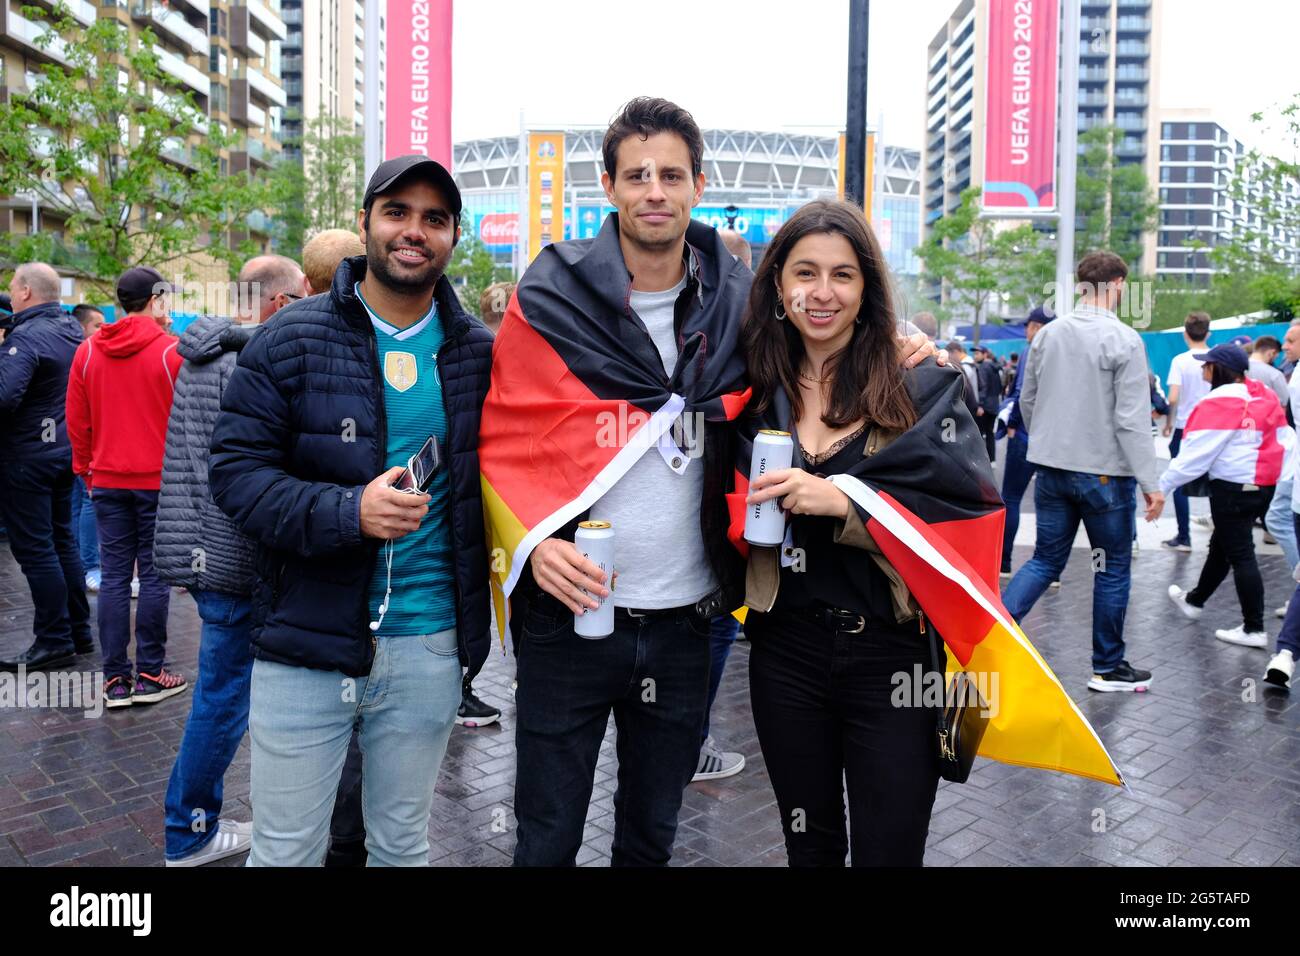 German supporters outside Wembley Stadium before Euro 2020 match against England. Stock Photo